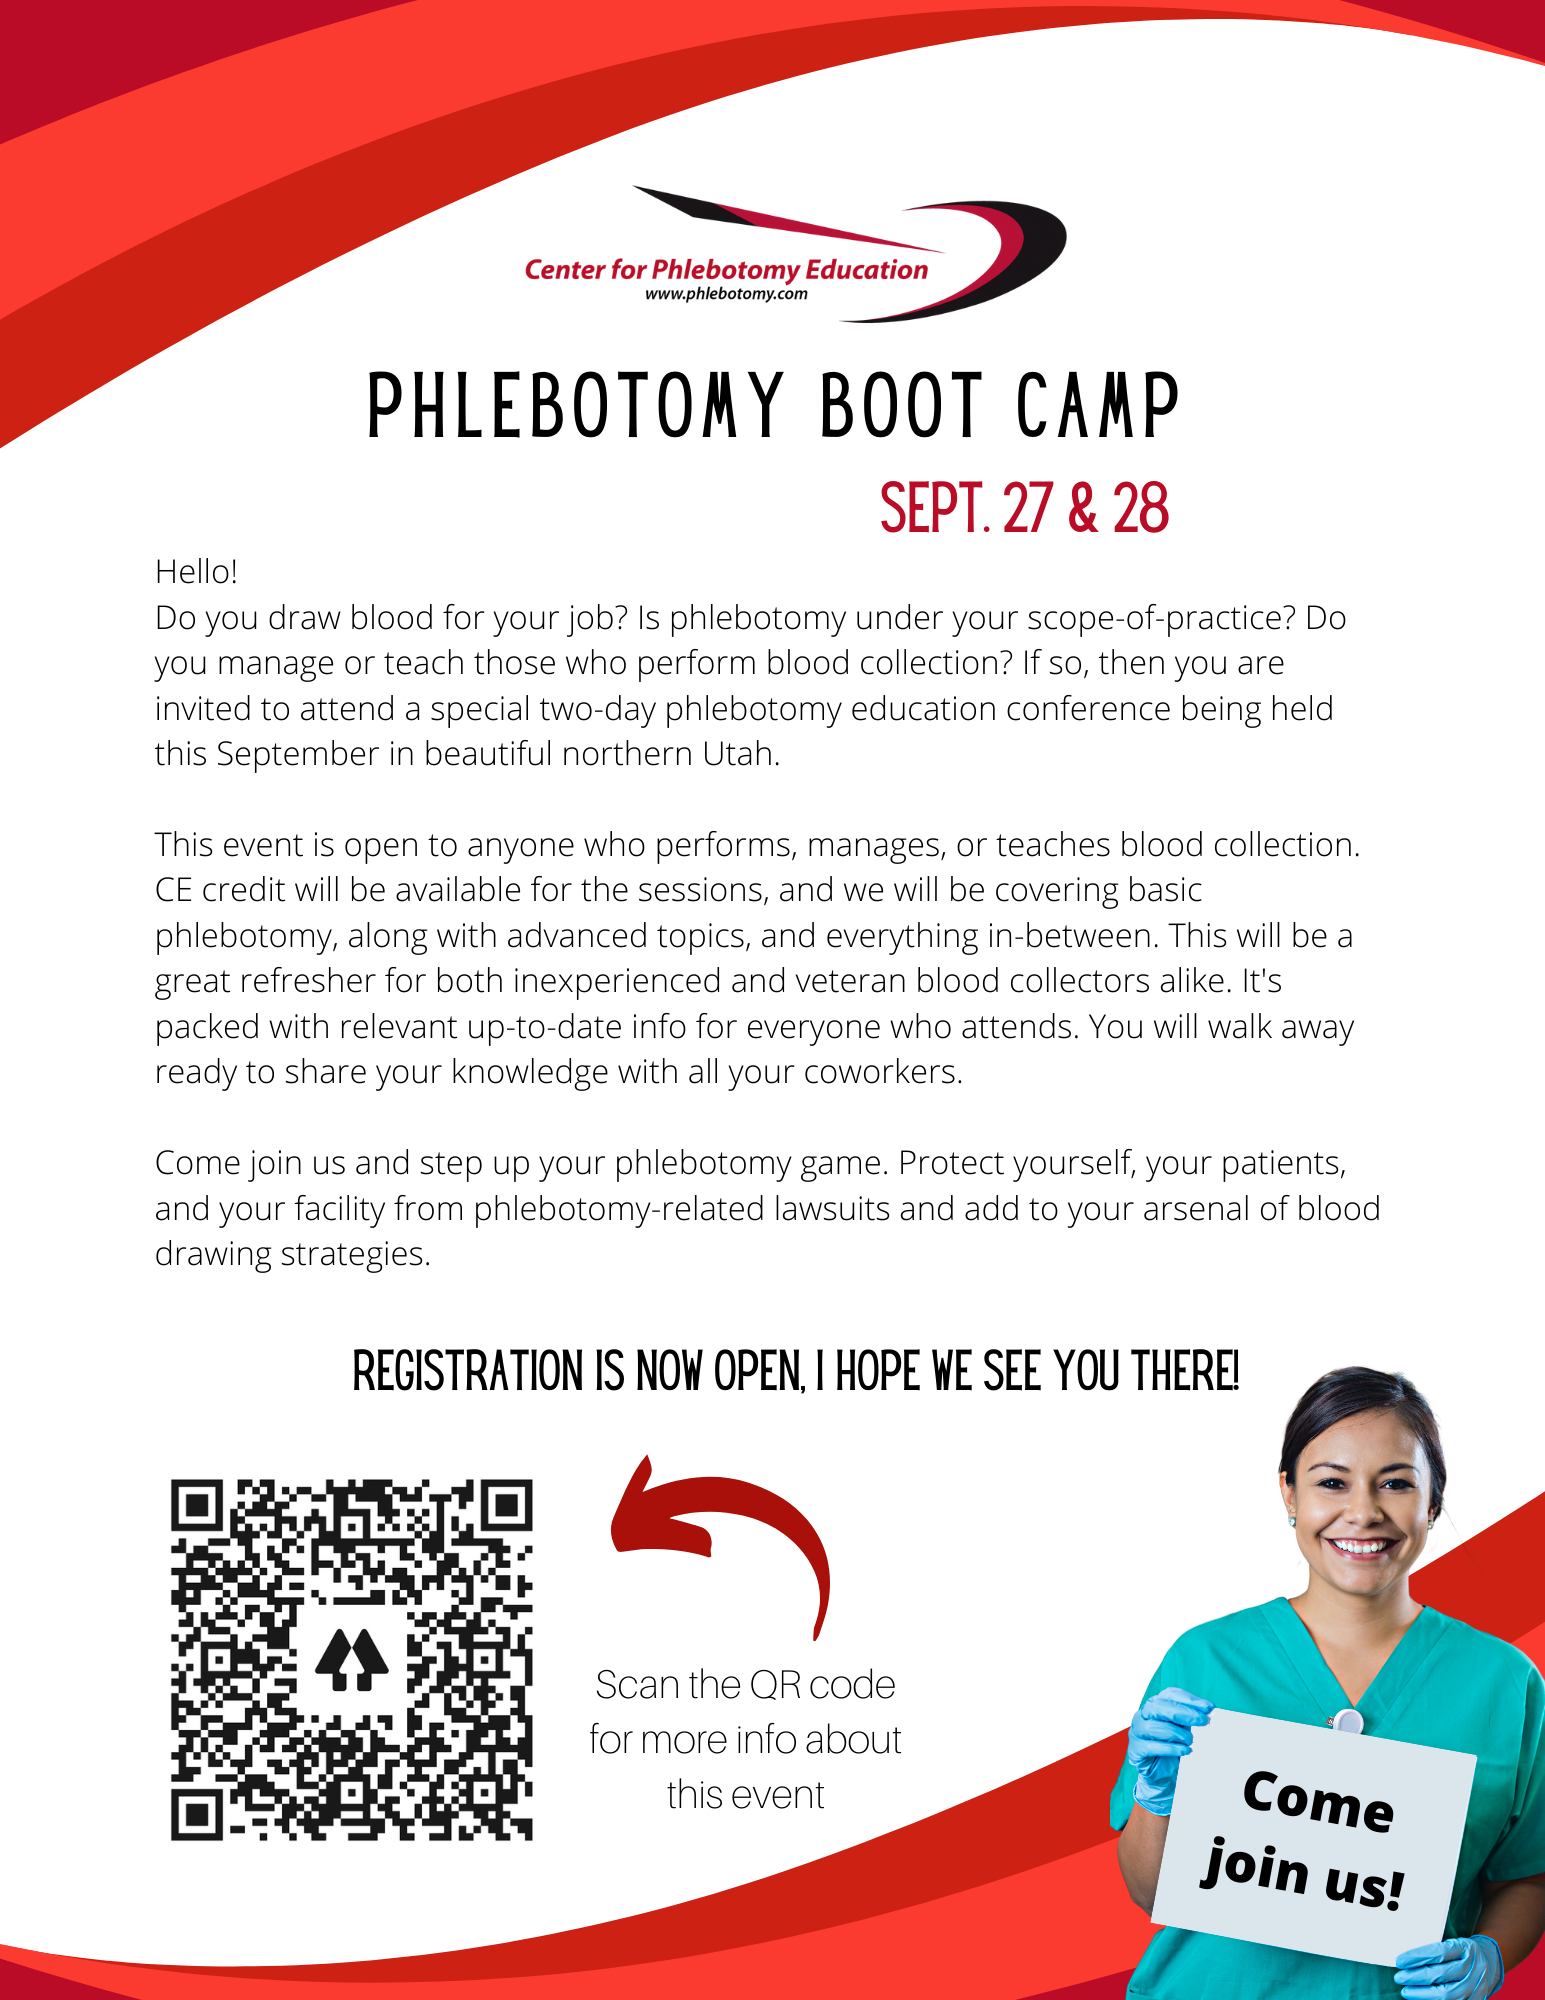 Join us at a PHLEBOTOMY CONFERENCE!